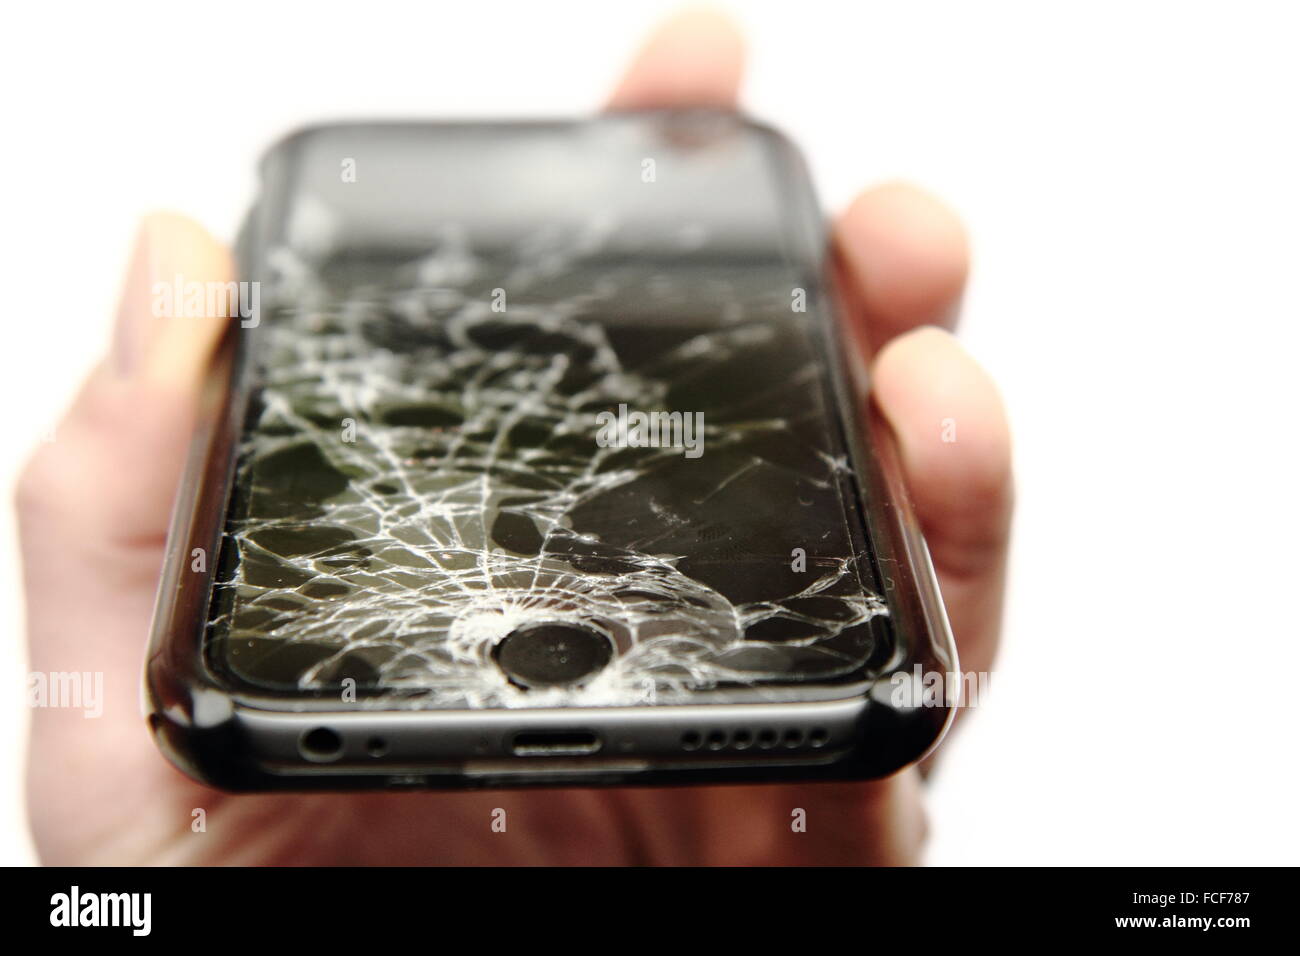 iPhone 6 with broken glass Stock Photo - Alamy